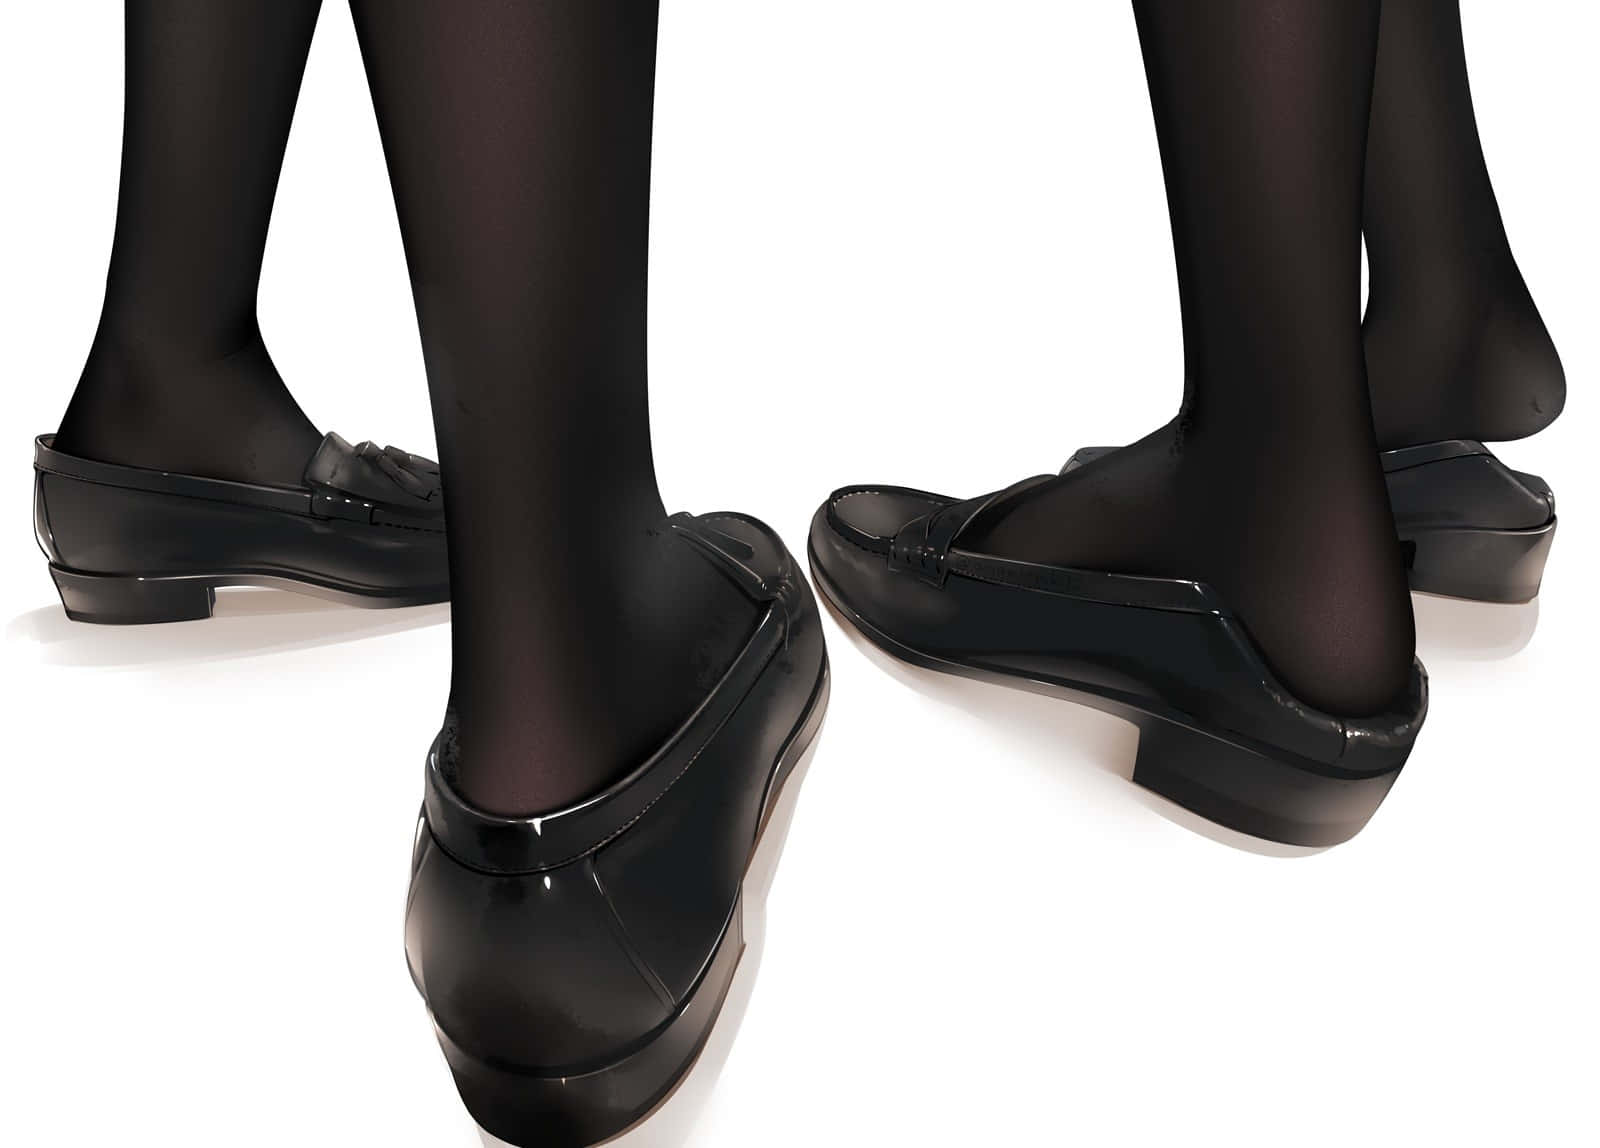 Girl Feet On Black Stockings And Shoes Wallpaper